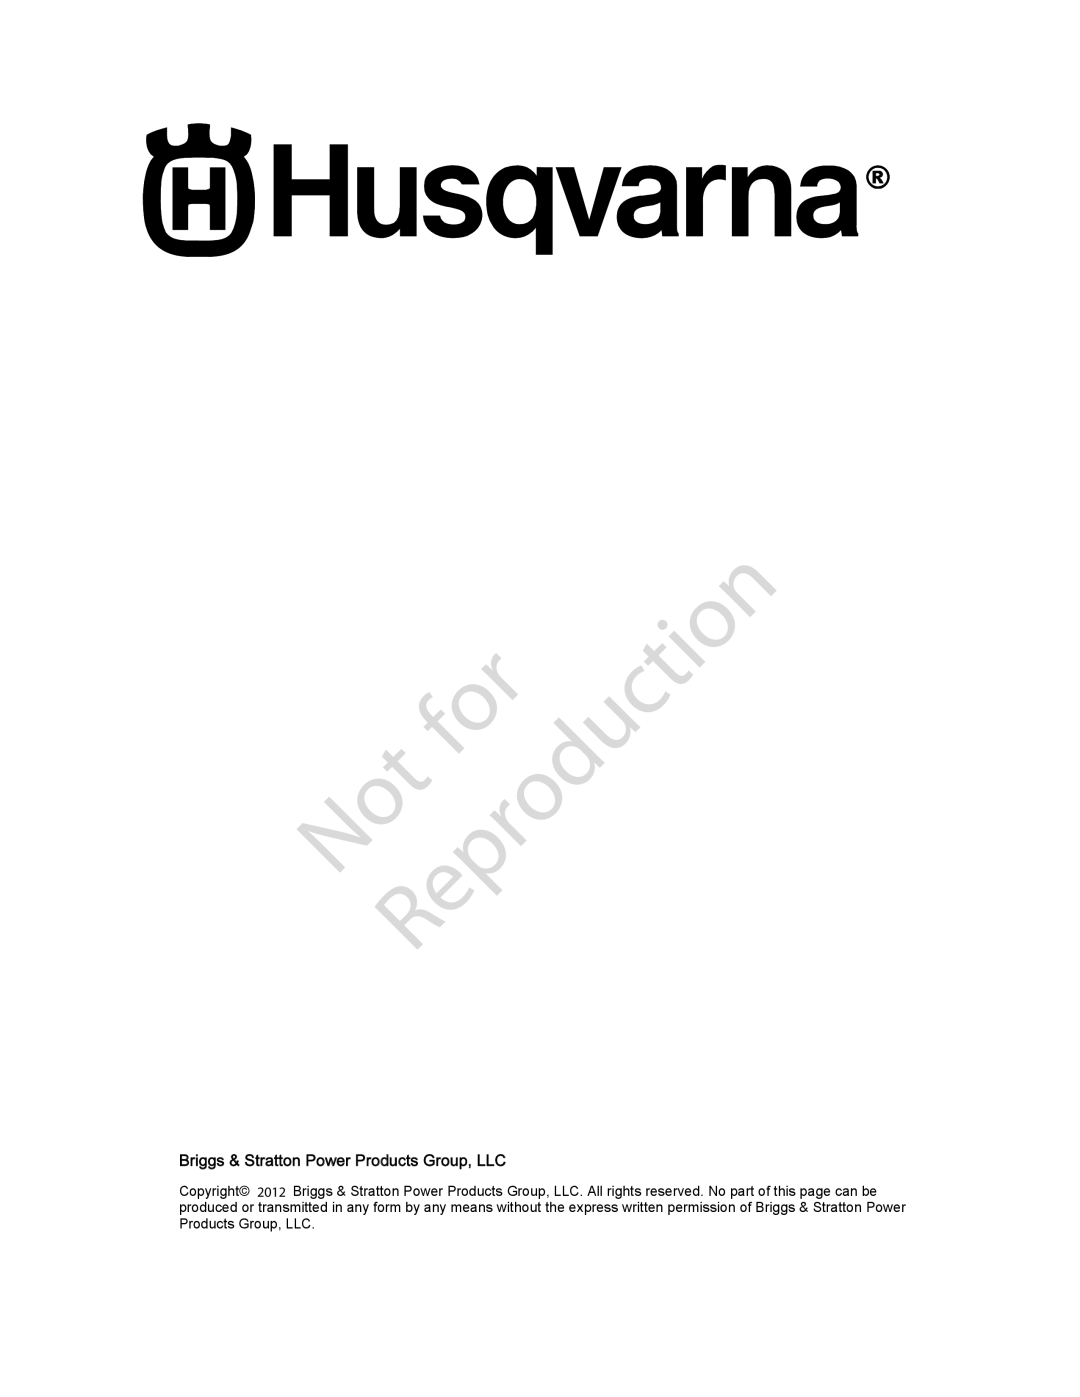 Husqvarna 300 PSI, 020524-00 3 manual Reproduction, Briggs & Stratton Power Products Group, LLC 